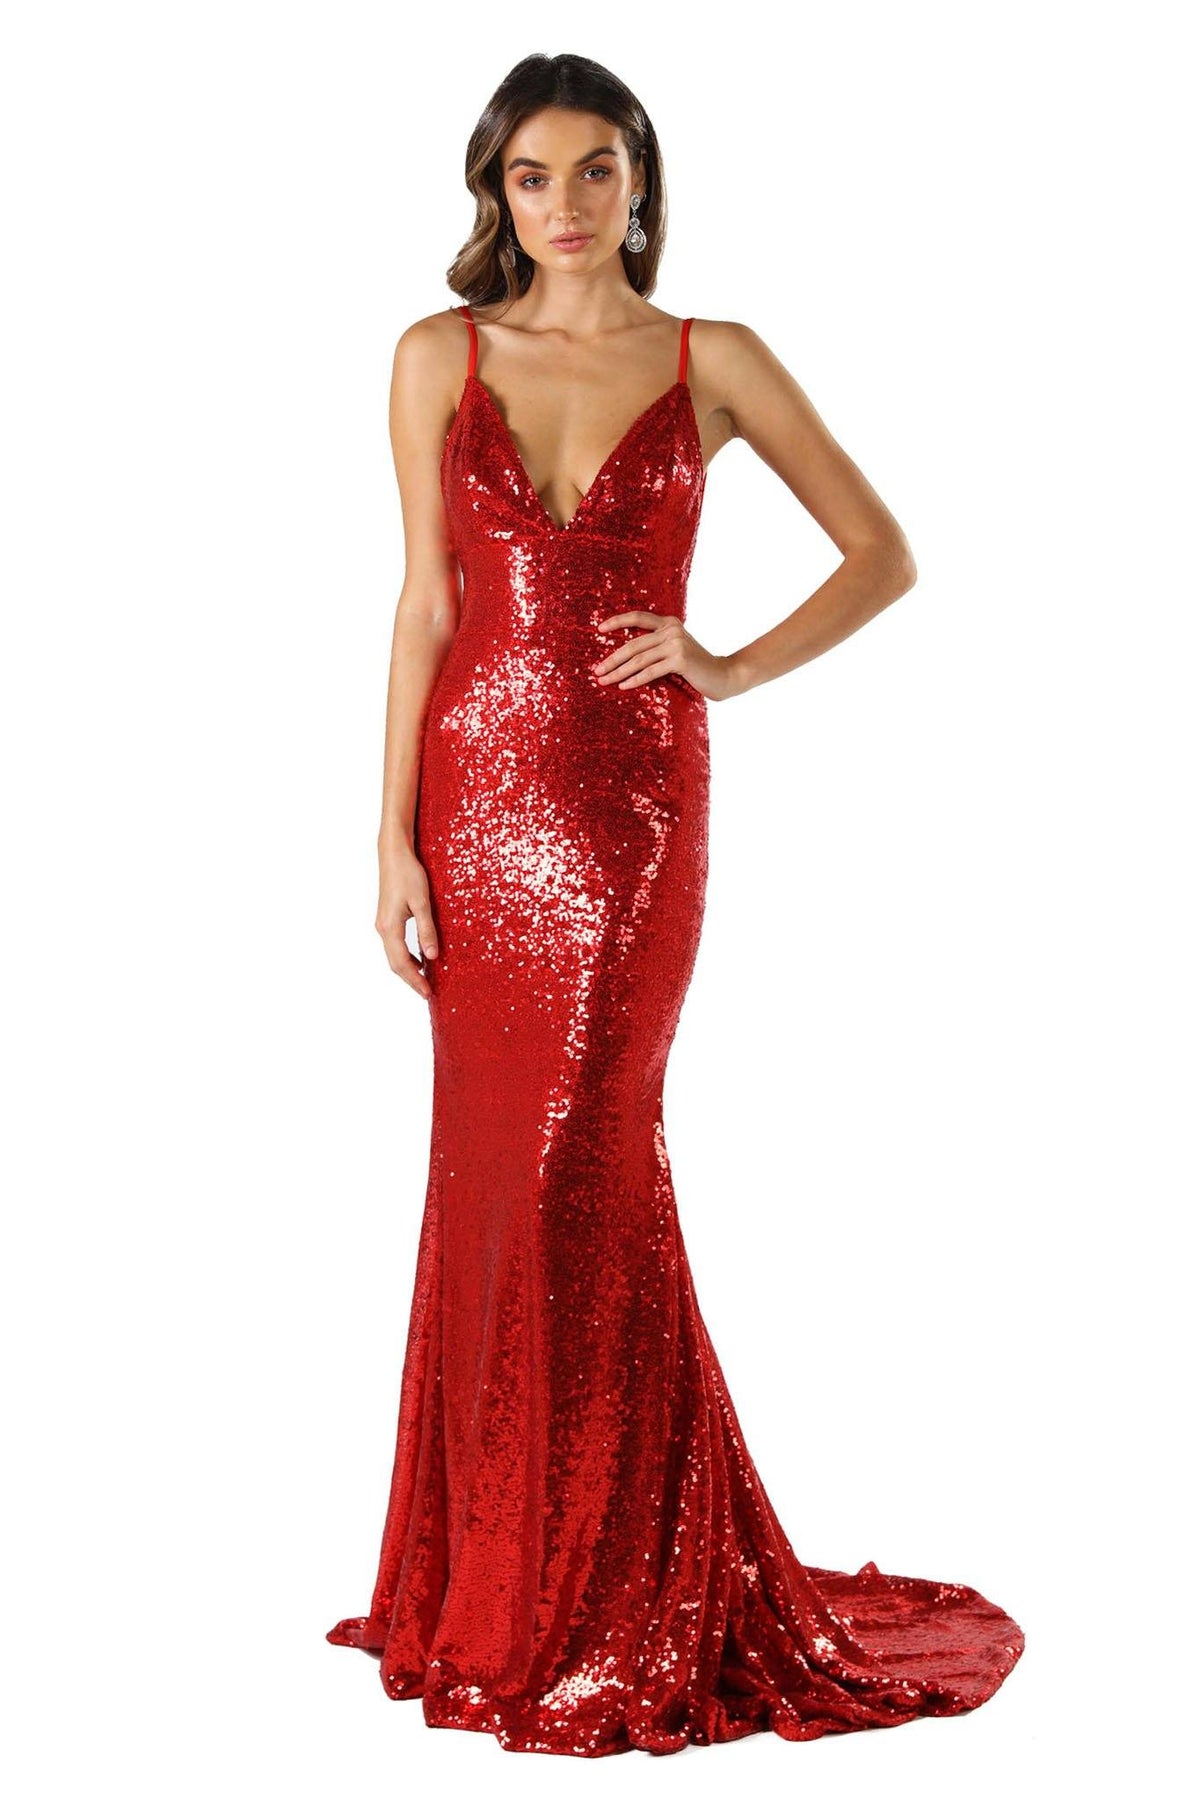 Deep V Neckline Design of Bright Red Fitted Sequin Formal Sleeveless Long Gown featuring Deep V Neck, Thin Shoulder Straps, Open back design, and Long Train